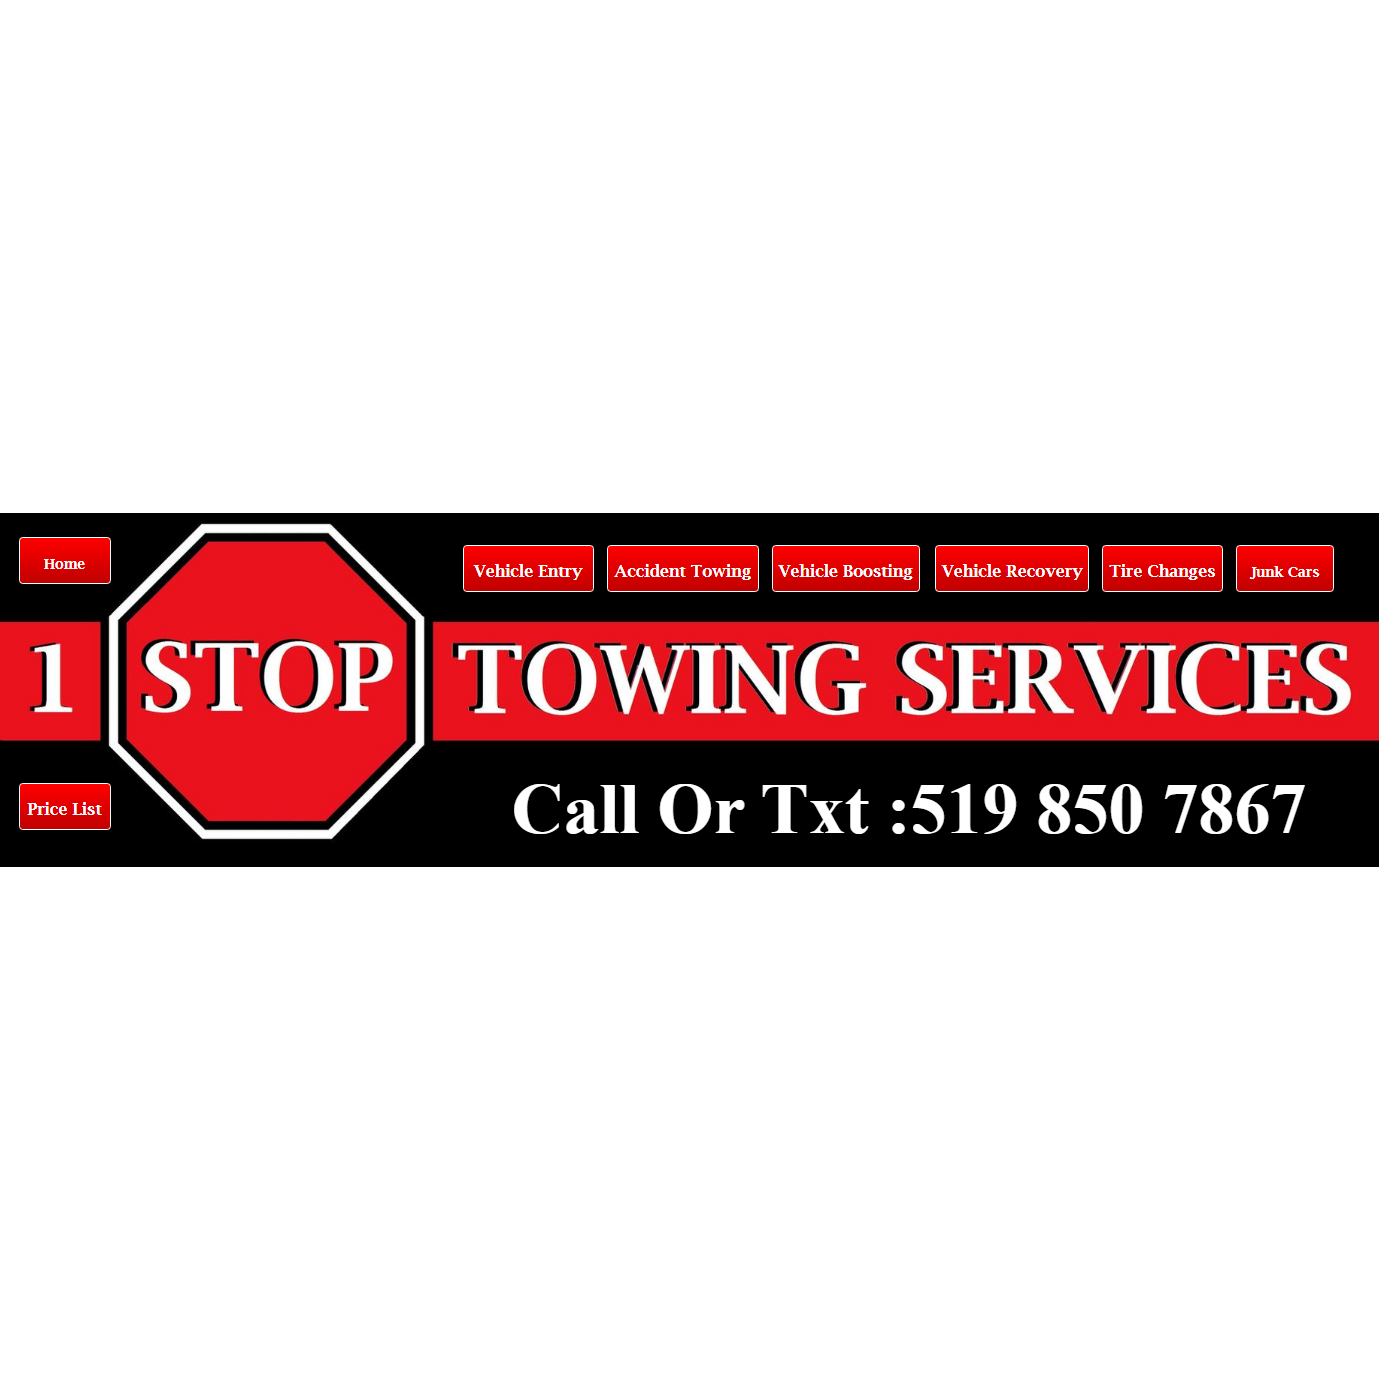 1 Stop Towing